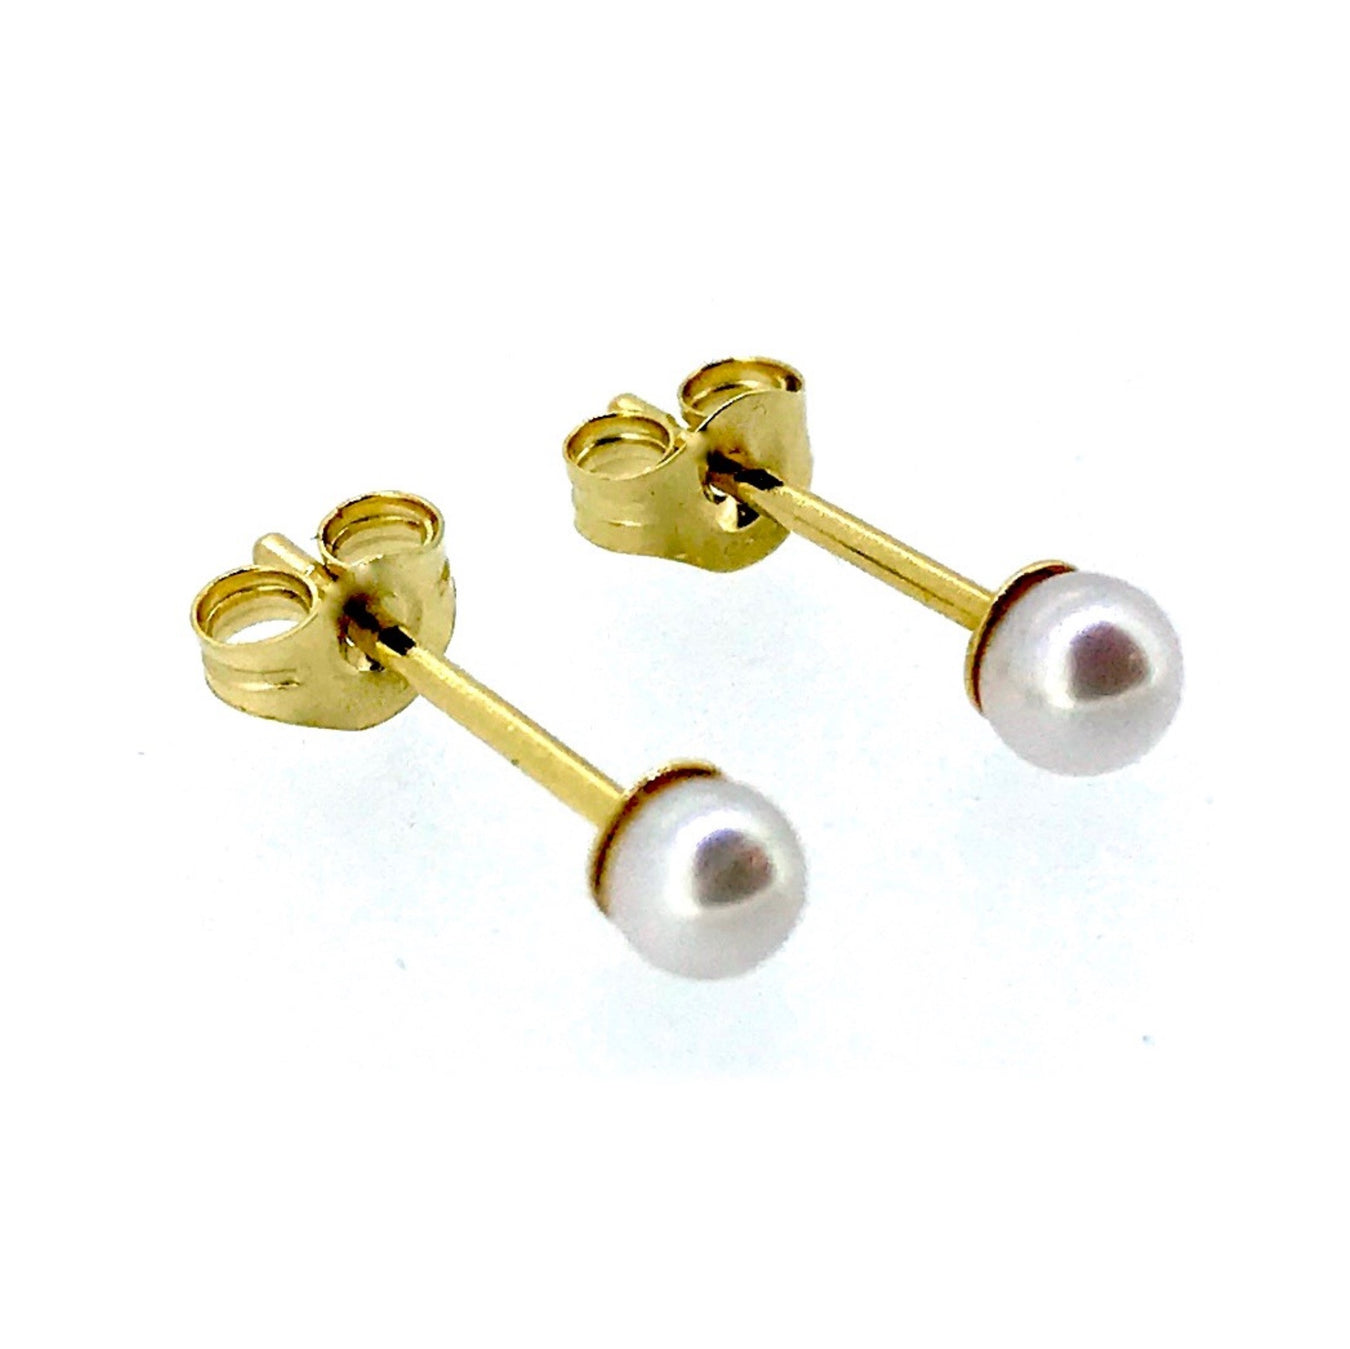 Elegant 9ct gold stud earrings, adding a touch of sophistication to any outfit